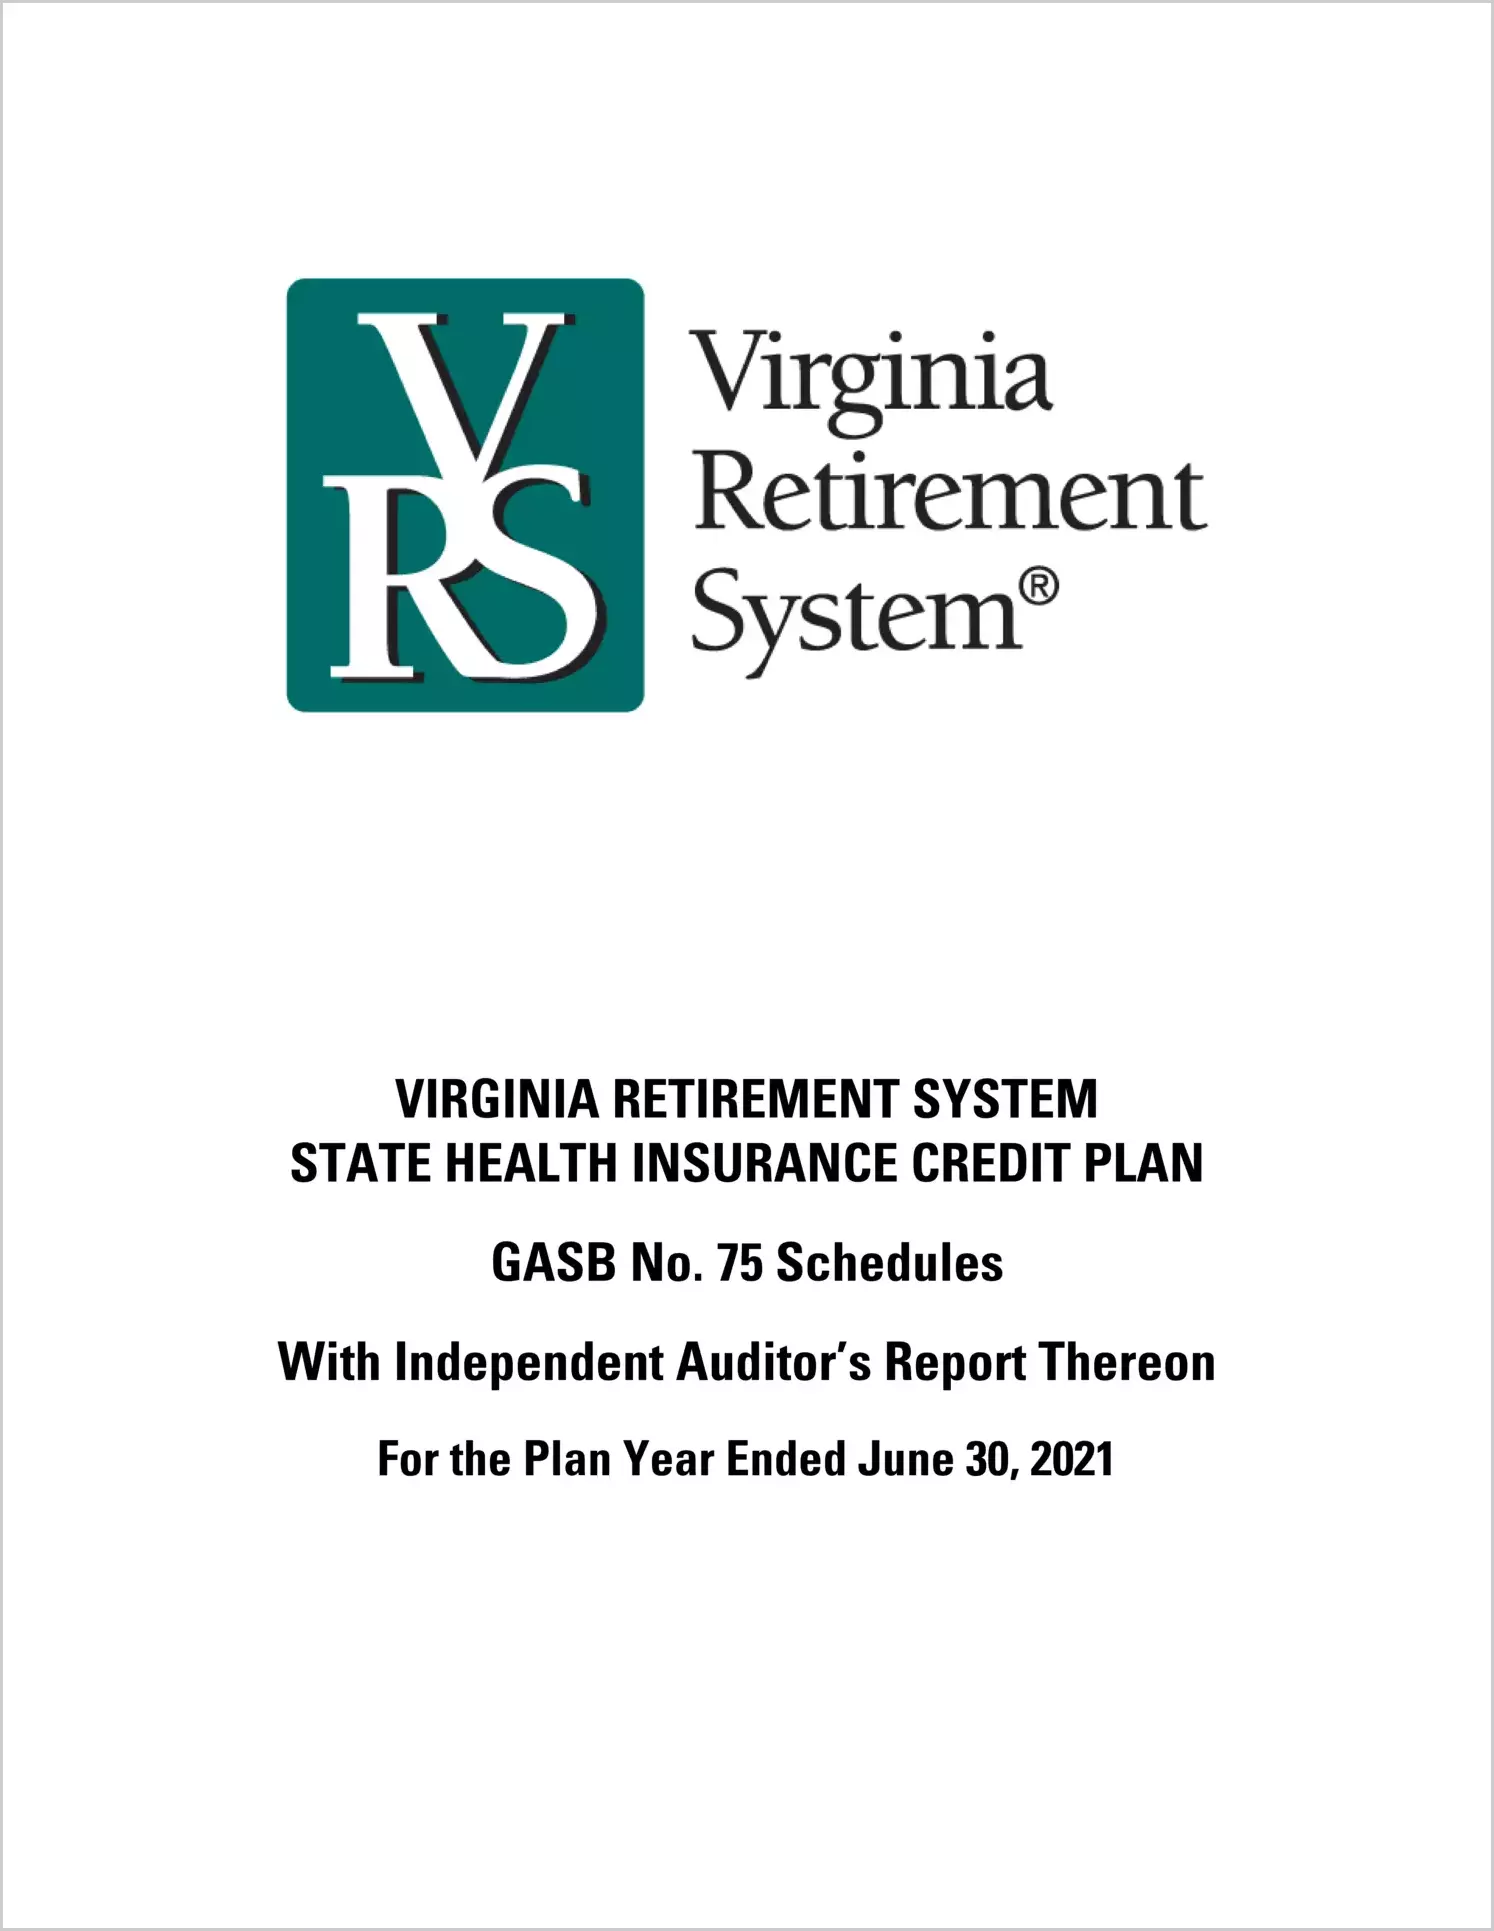 GASB 75 Schedules - Virginia Retirement System State Health Insurance Credit Plan for the year ended June 30, 2021